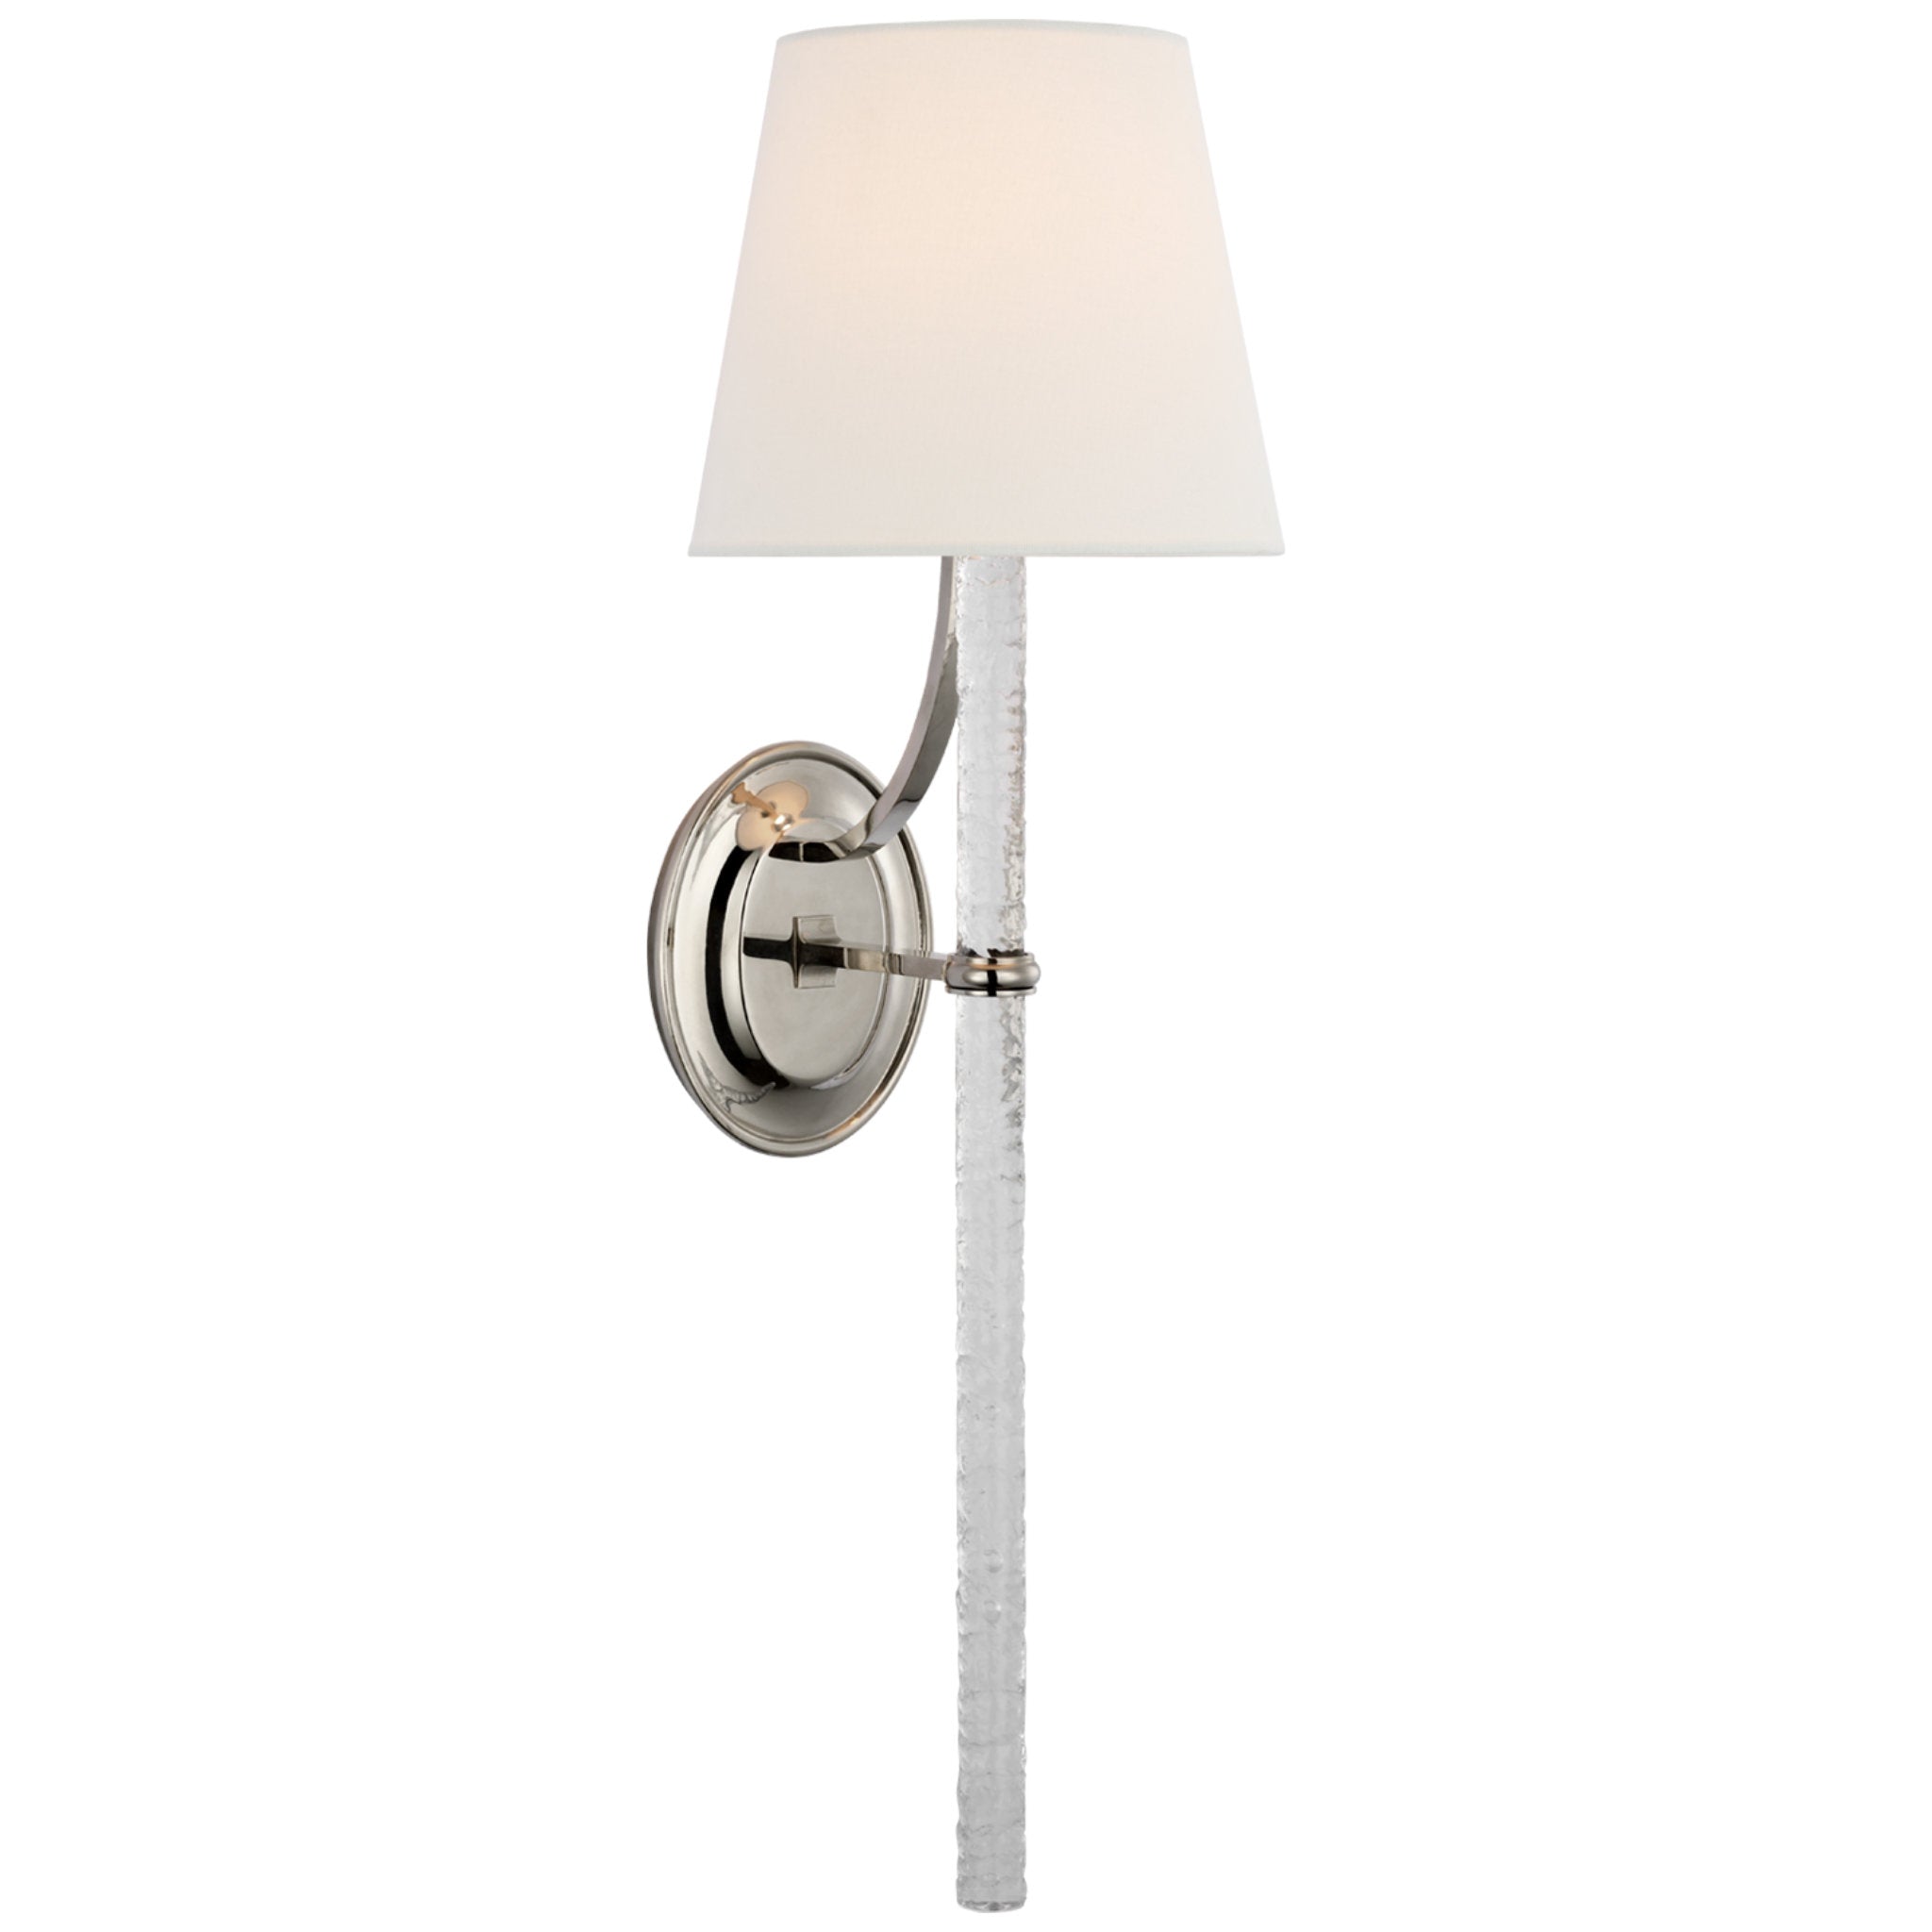 Marie Flanigan Abigail XL Sconce in Polished Nickel and Clear Wavy Glass with Linen Shade